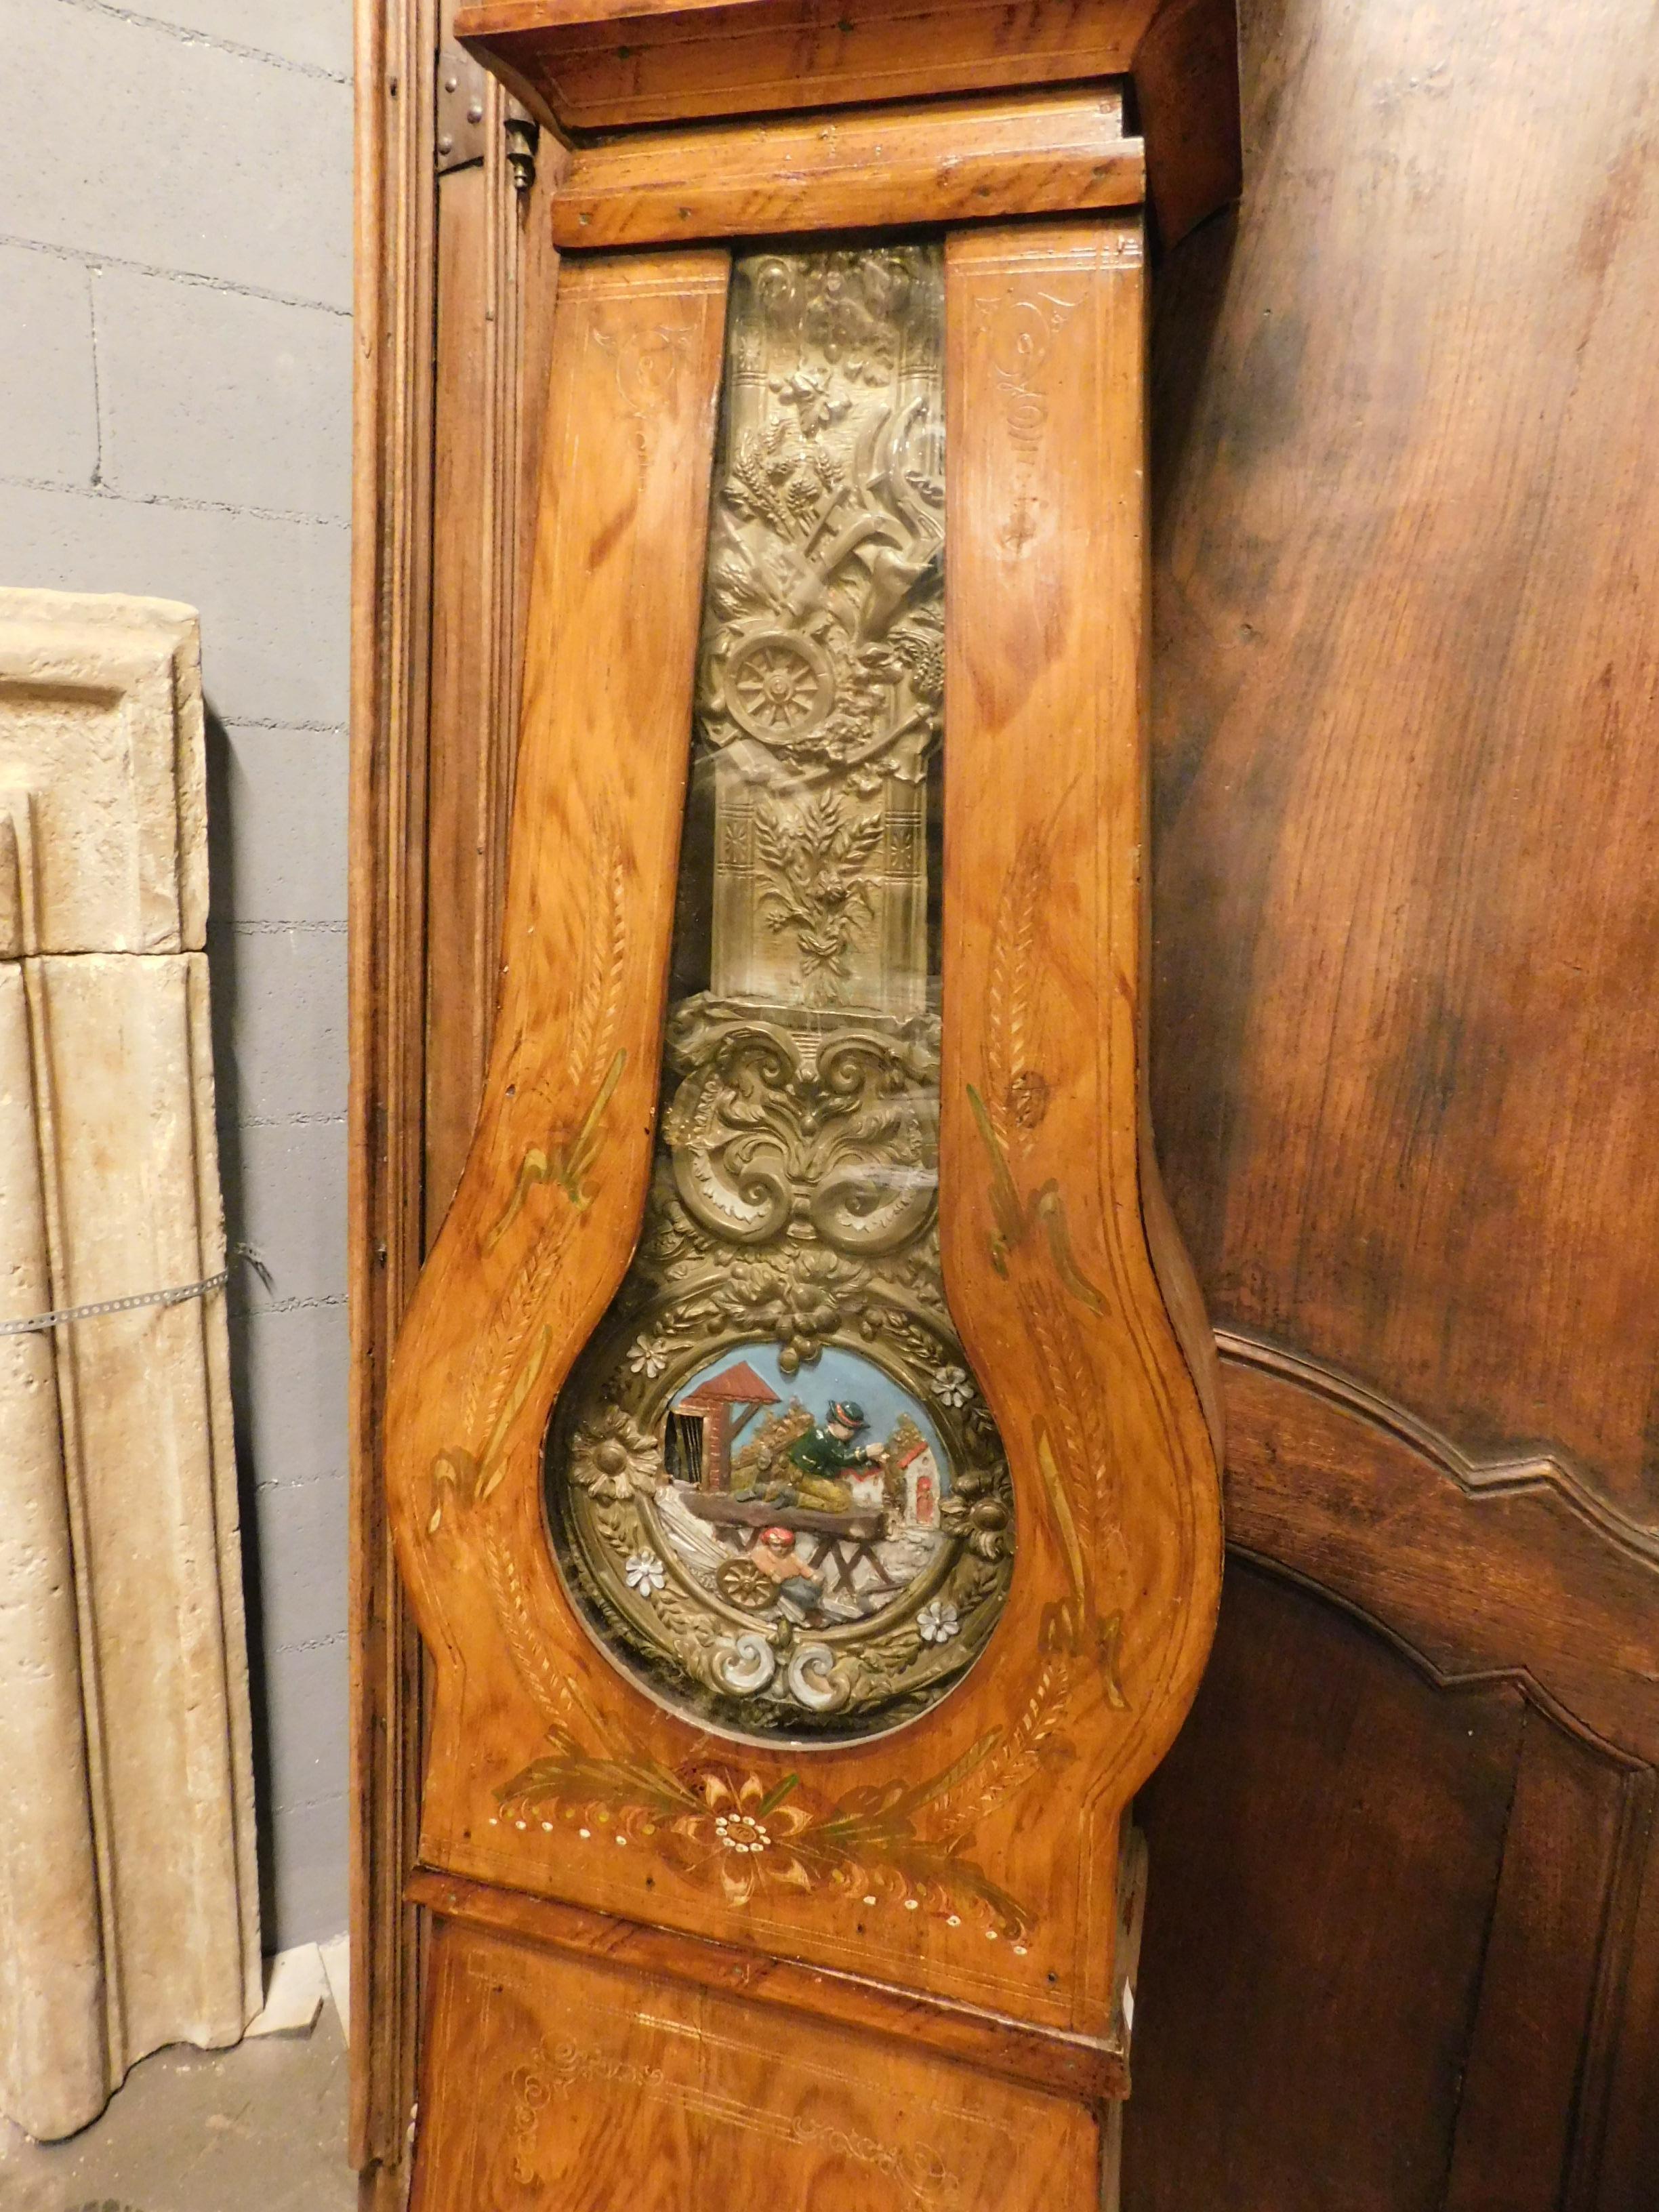 Hand-Carved Antique Wall Pendulum in Painted Wood, 19th Century France